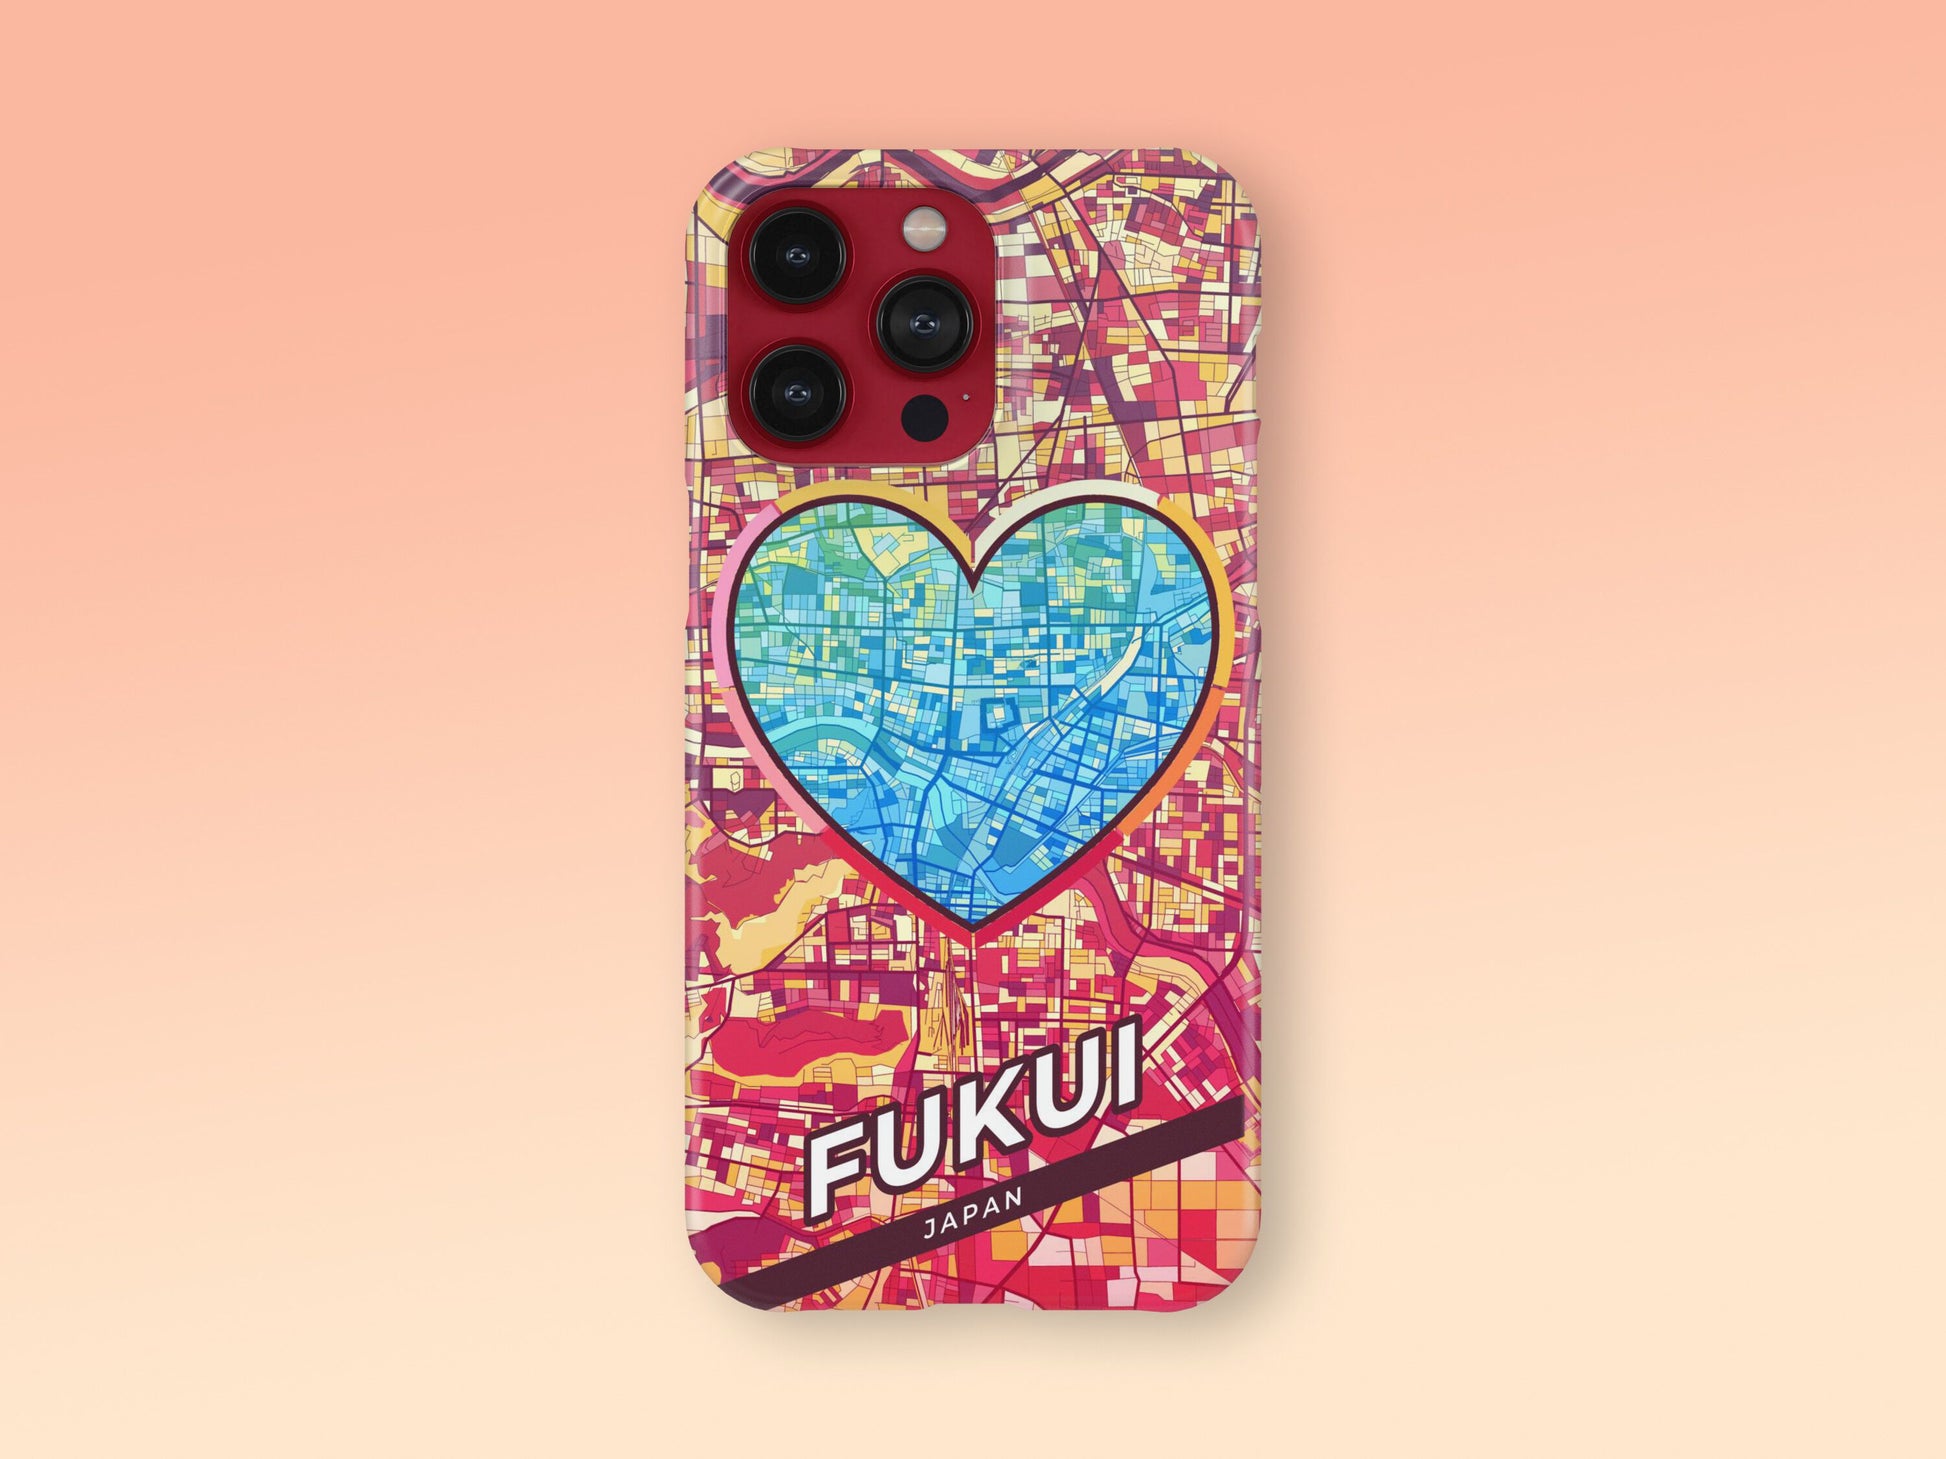 Fukui Japan slim phone case with colorful icon. Birthday, wedding or housewarming gift. Couple match cases. 2